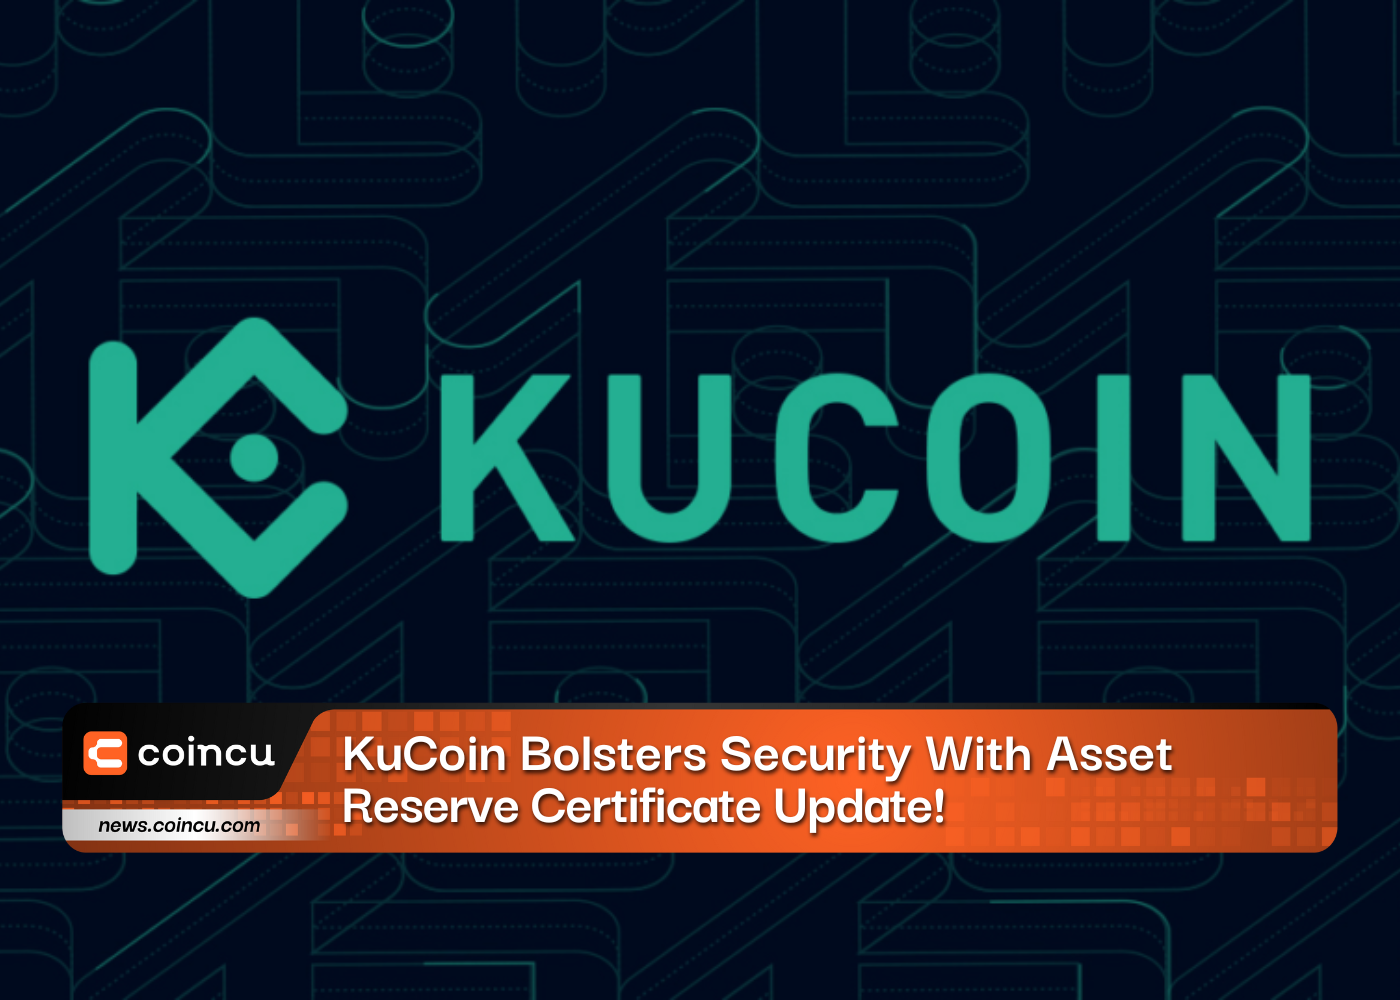 KuCoin Bolsters Security With Asset